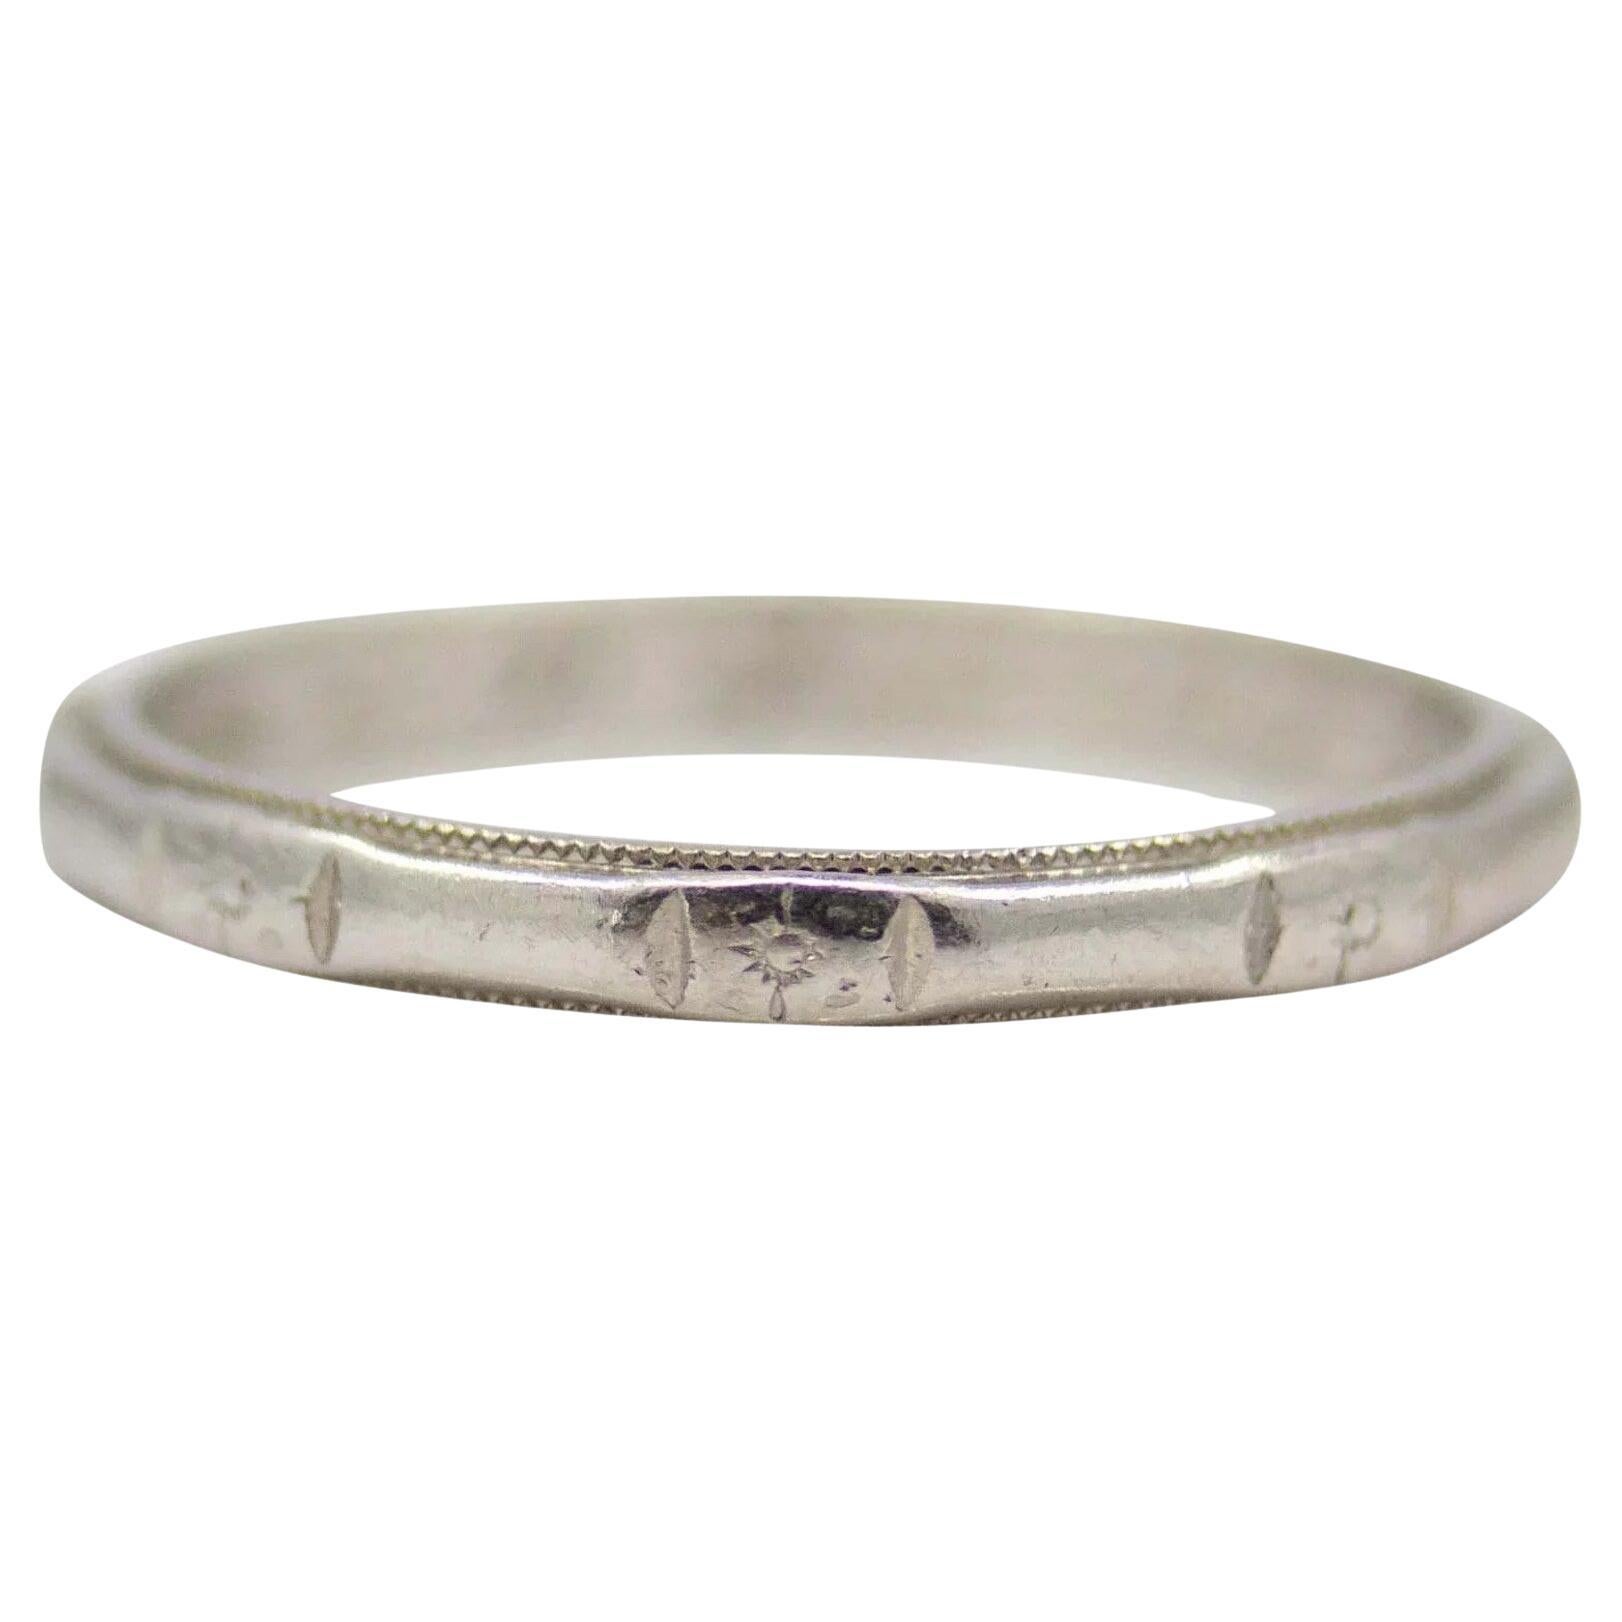 Hand Chased Art Deco Platinum Wedding Band Size 6 1/2 For Sale